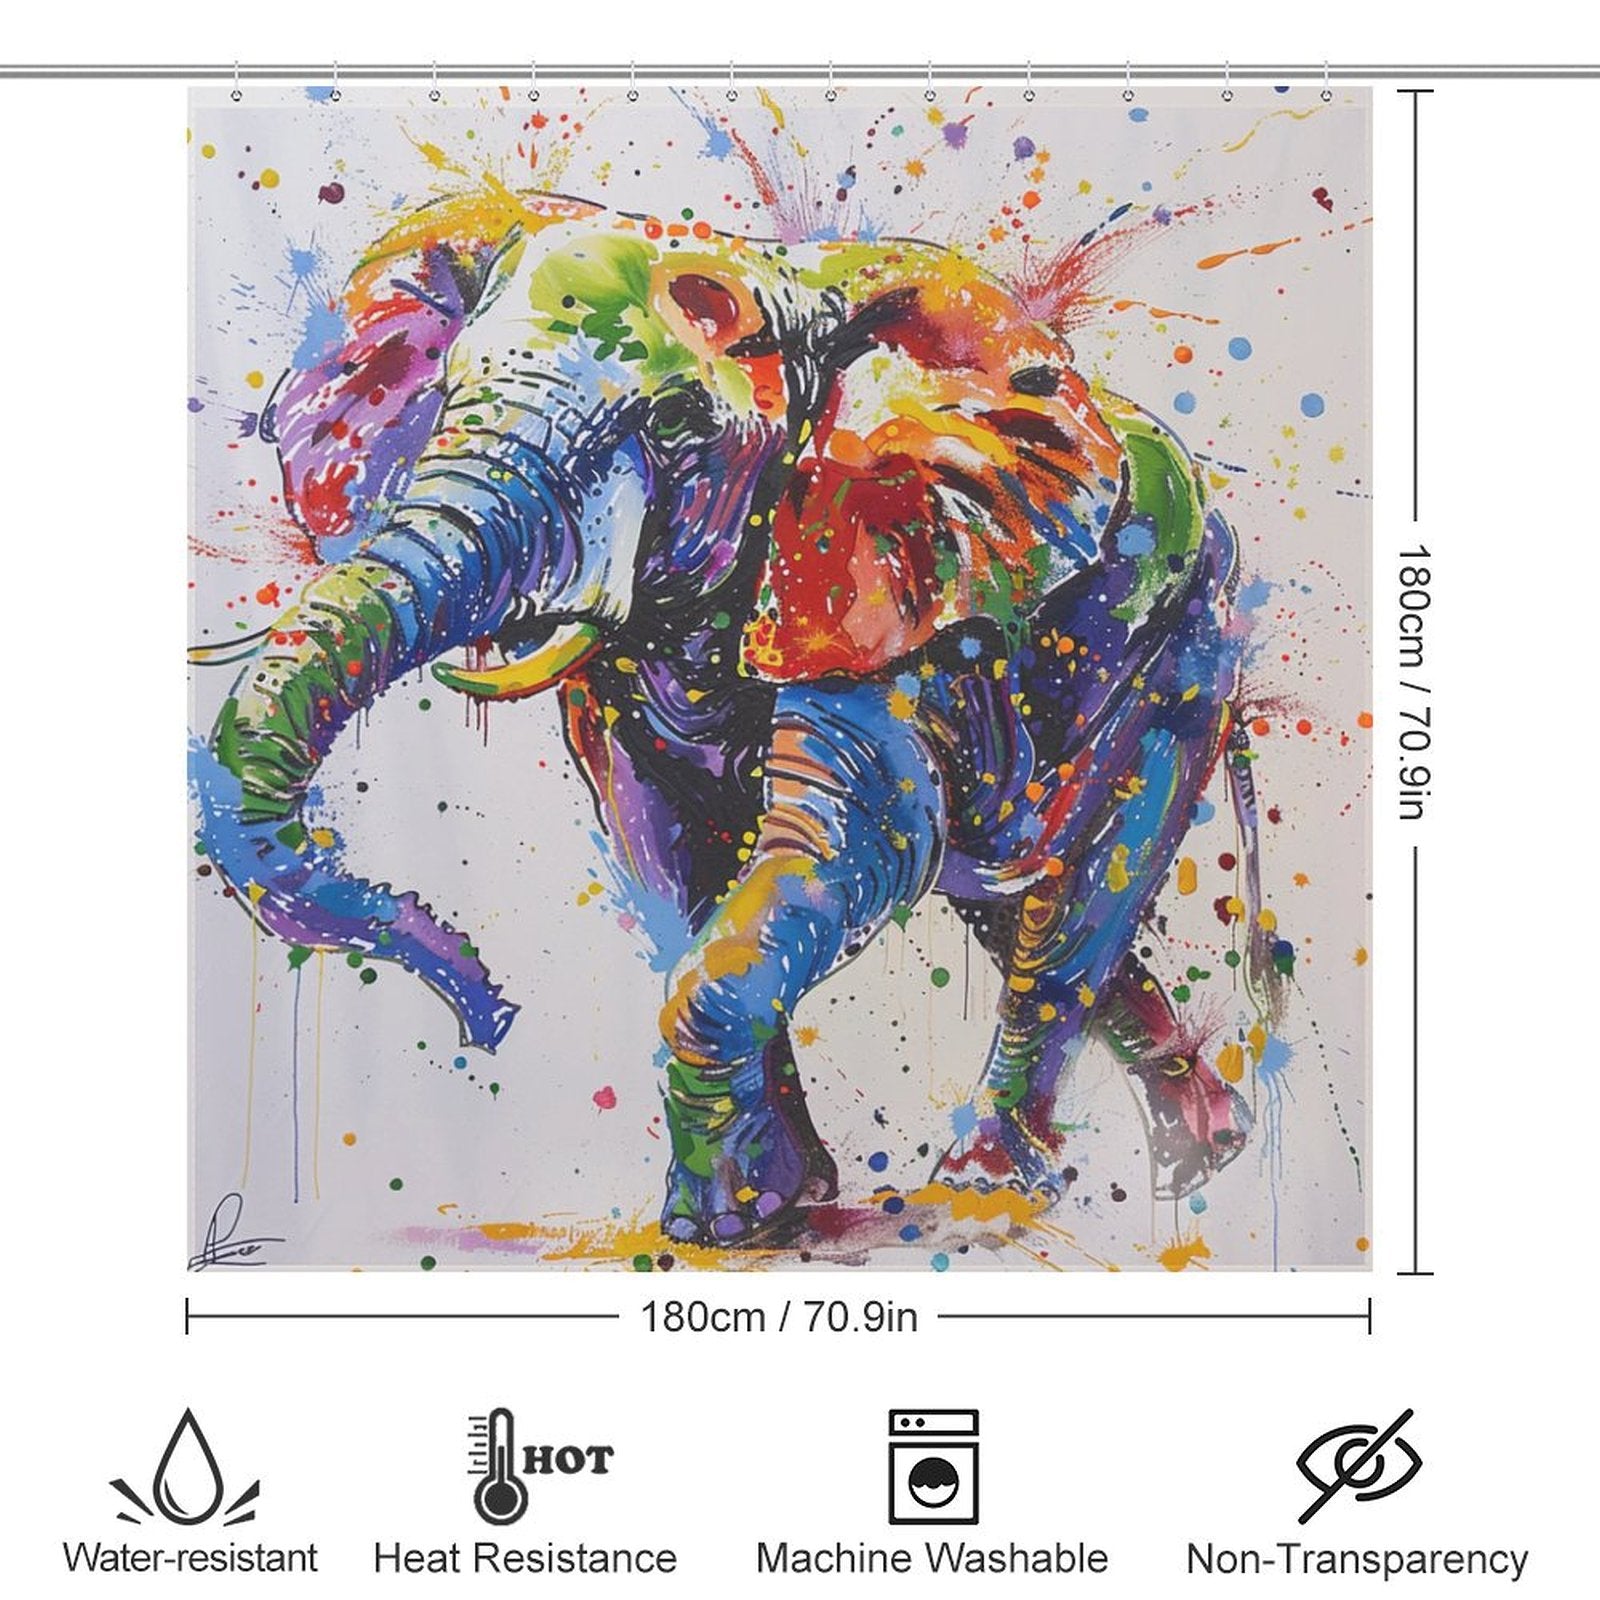 The Cotton Cat Artistic Painting Happy Elephant Shower Curtain-Cottoncat features a colorful elephant painting design. Measuring 180cm by 180cm, the curtain is waterproof, heat-resistant, machine washable, and non-transparent. Icons illustrate these features.